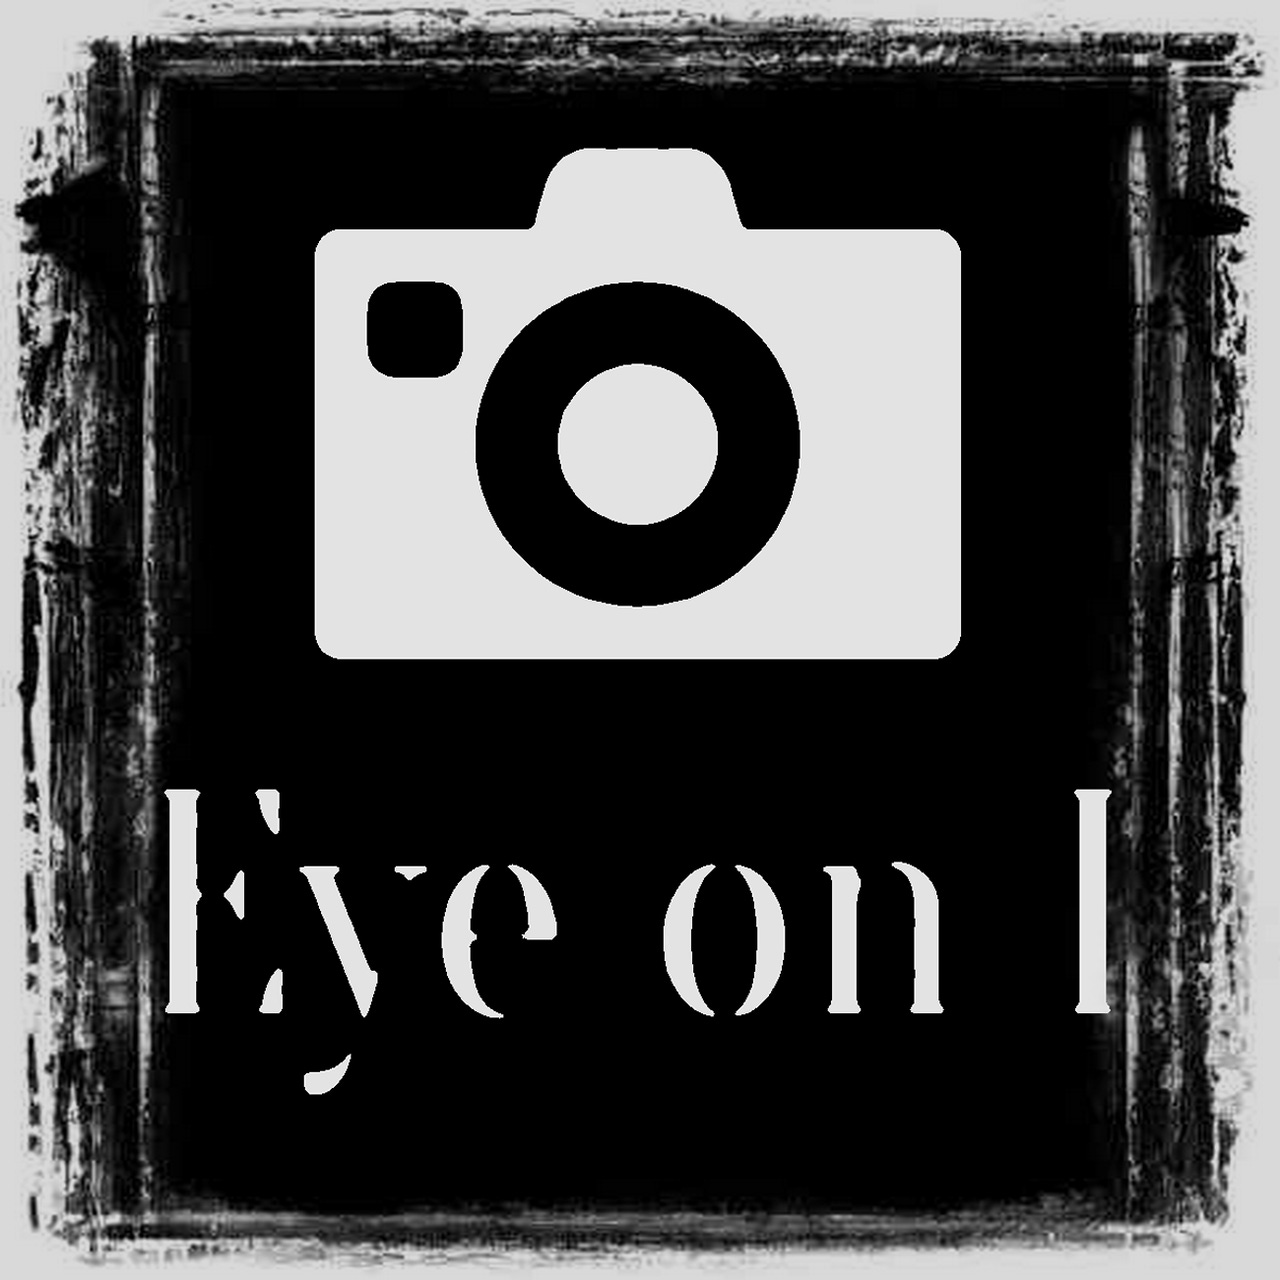 Artwork for Eye on I: Projections of a Street Photographer